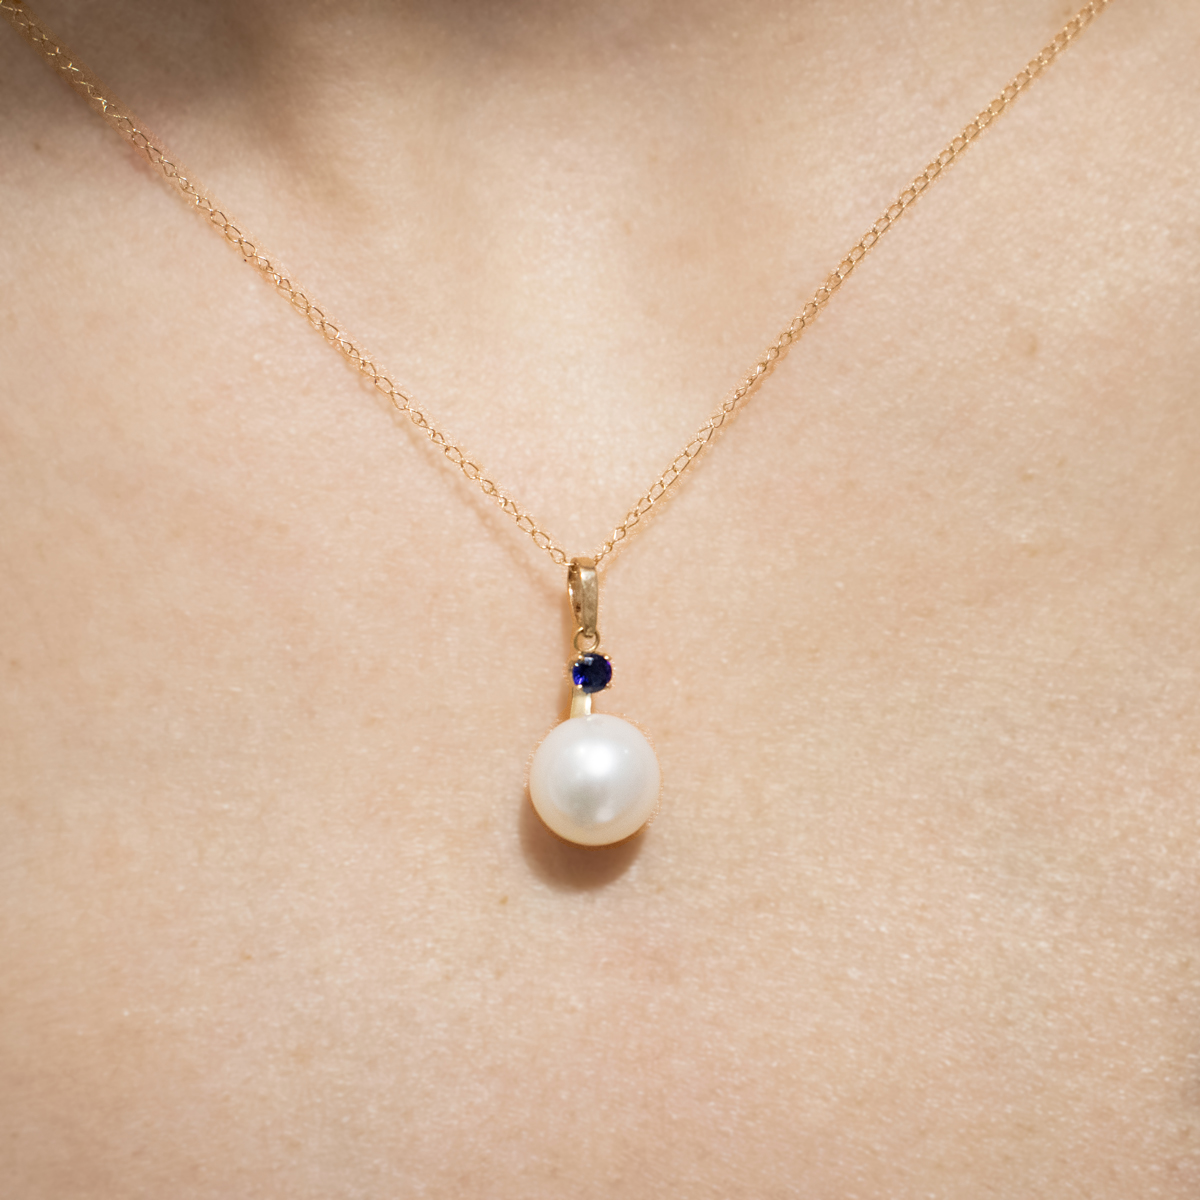 Pearl Pendant with Blue Sapphire and Chain, 14k Yellow Gold